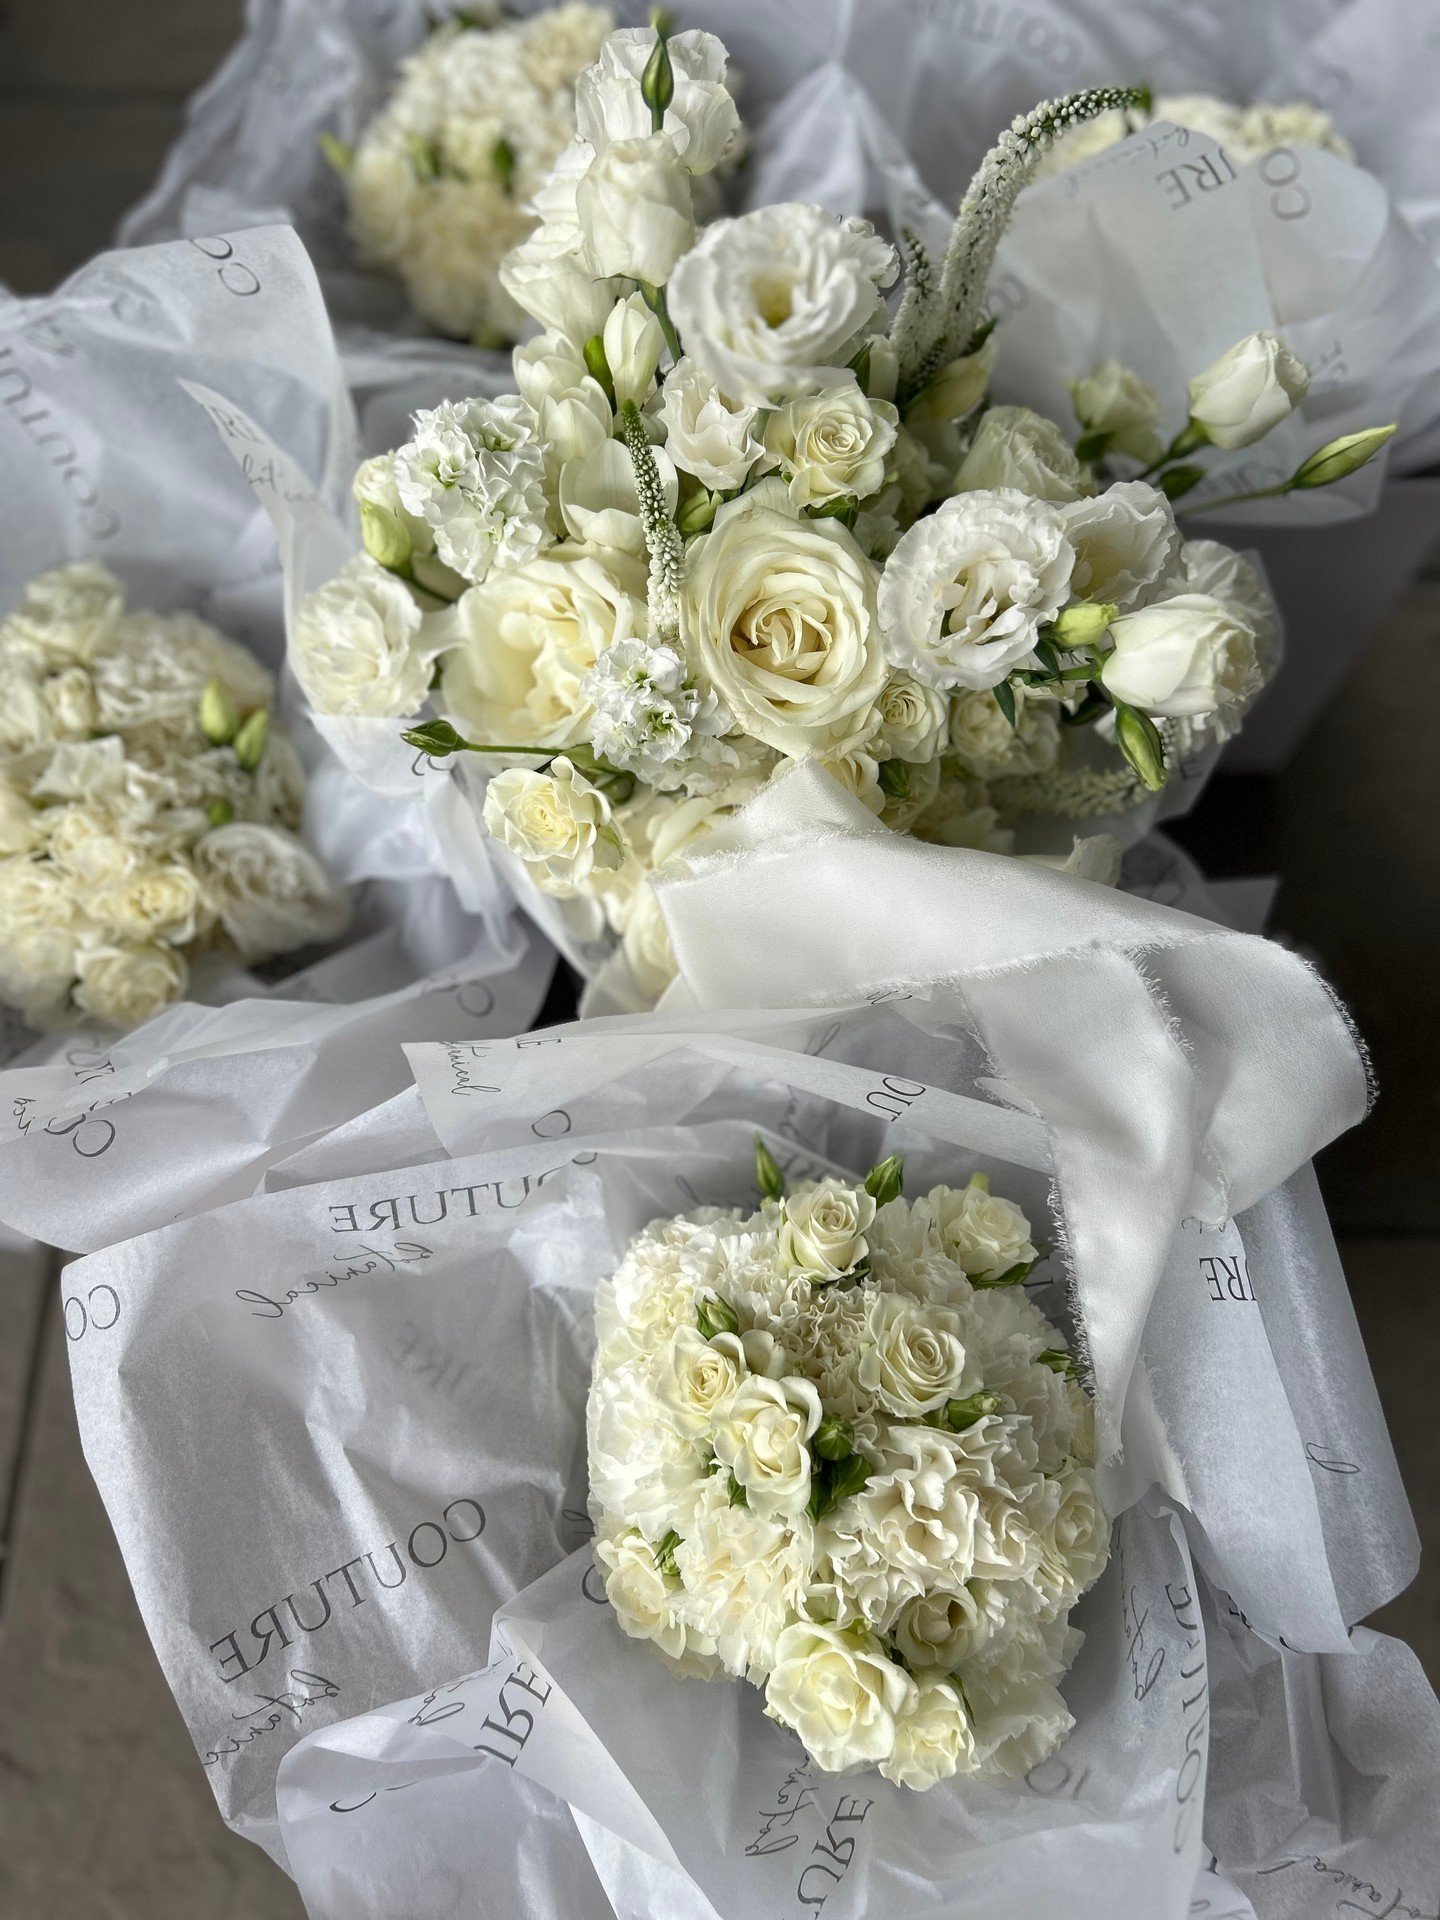 Timeless Elegance
No matter what the season, weddings are all about new beginnings, and what better way to capture that essence than with a bouquet that embodies purity and elegance? White colour, the colour of renewal and still slightly remaining sn